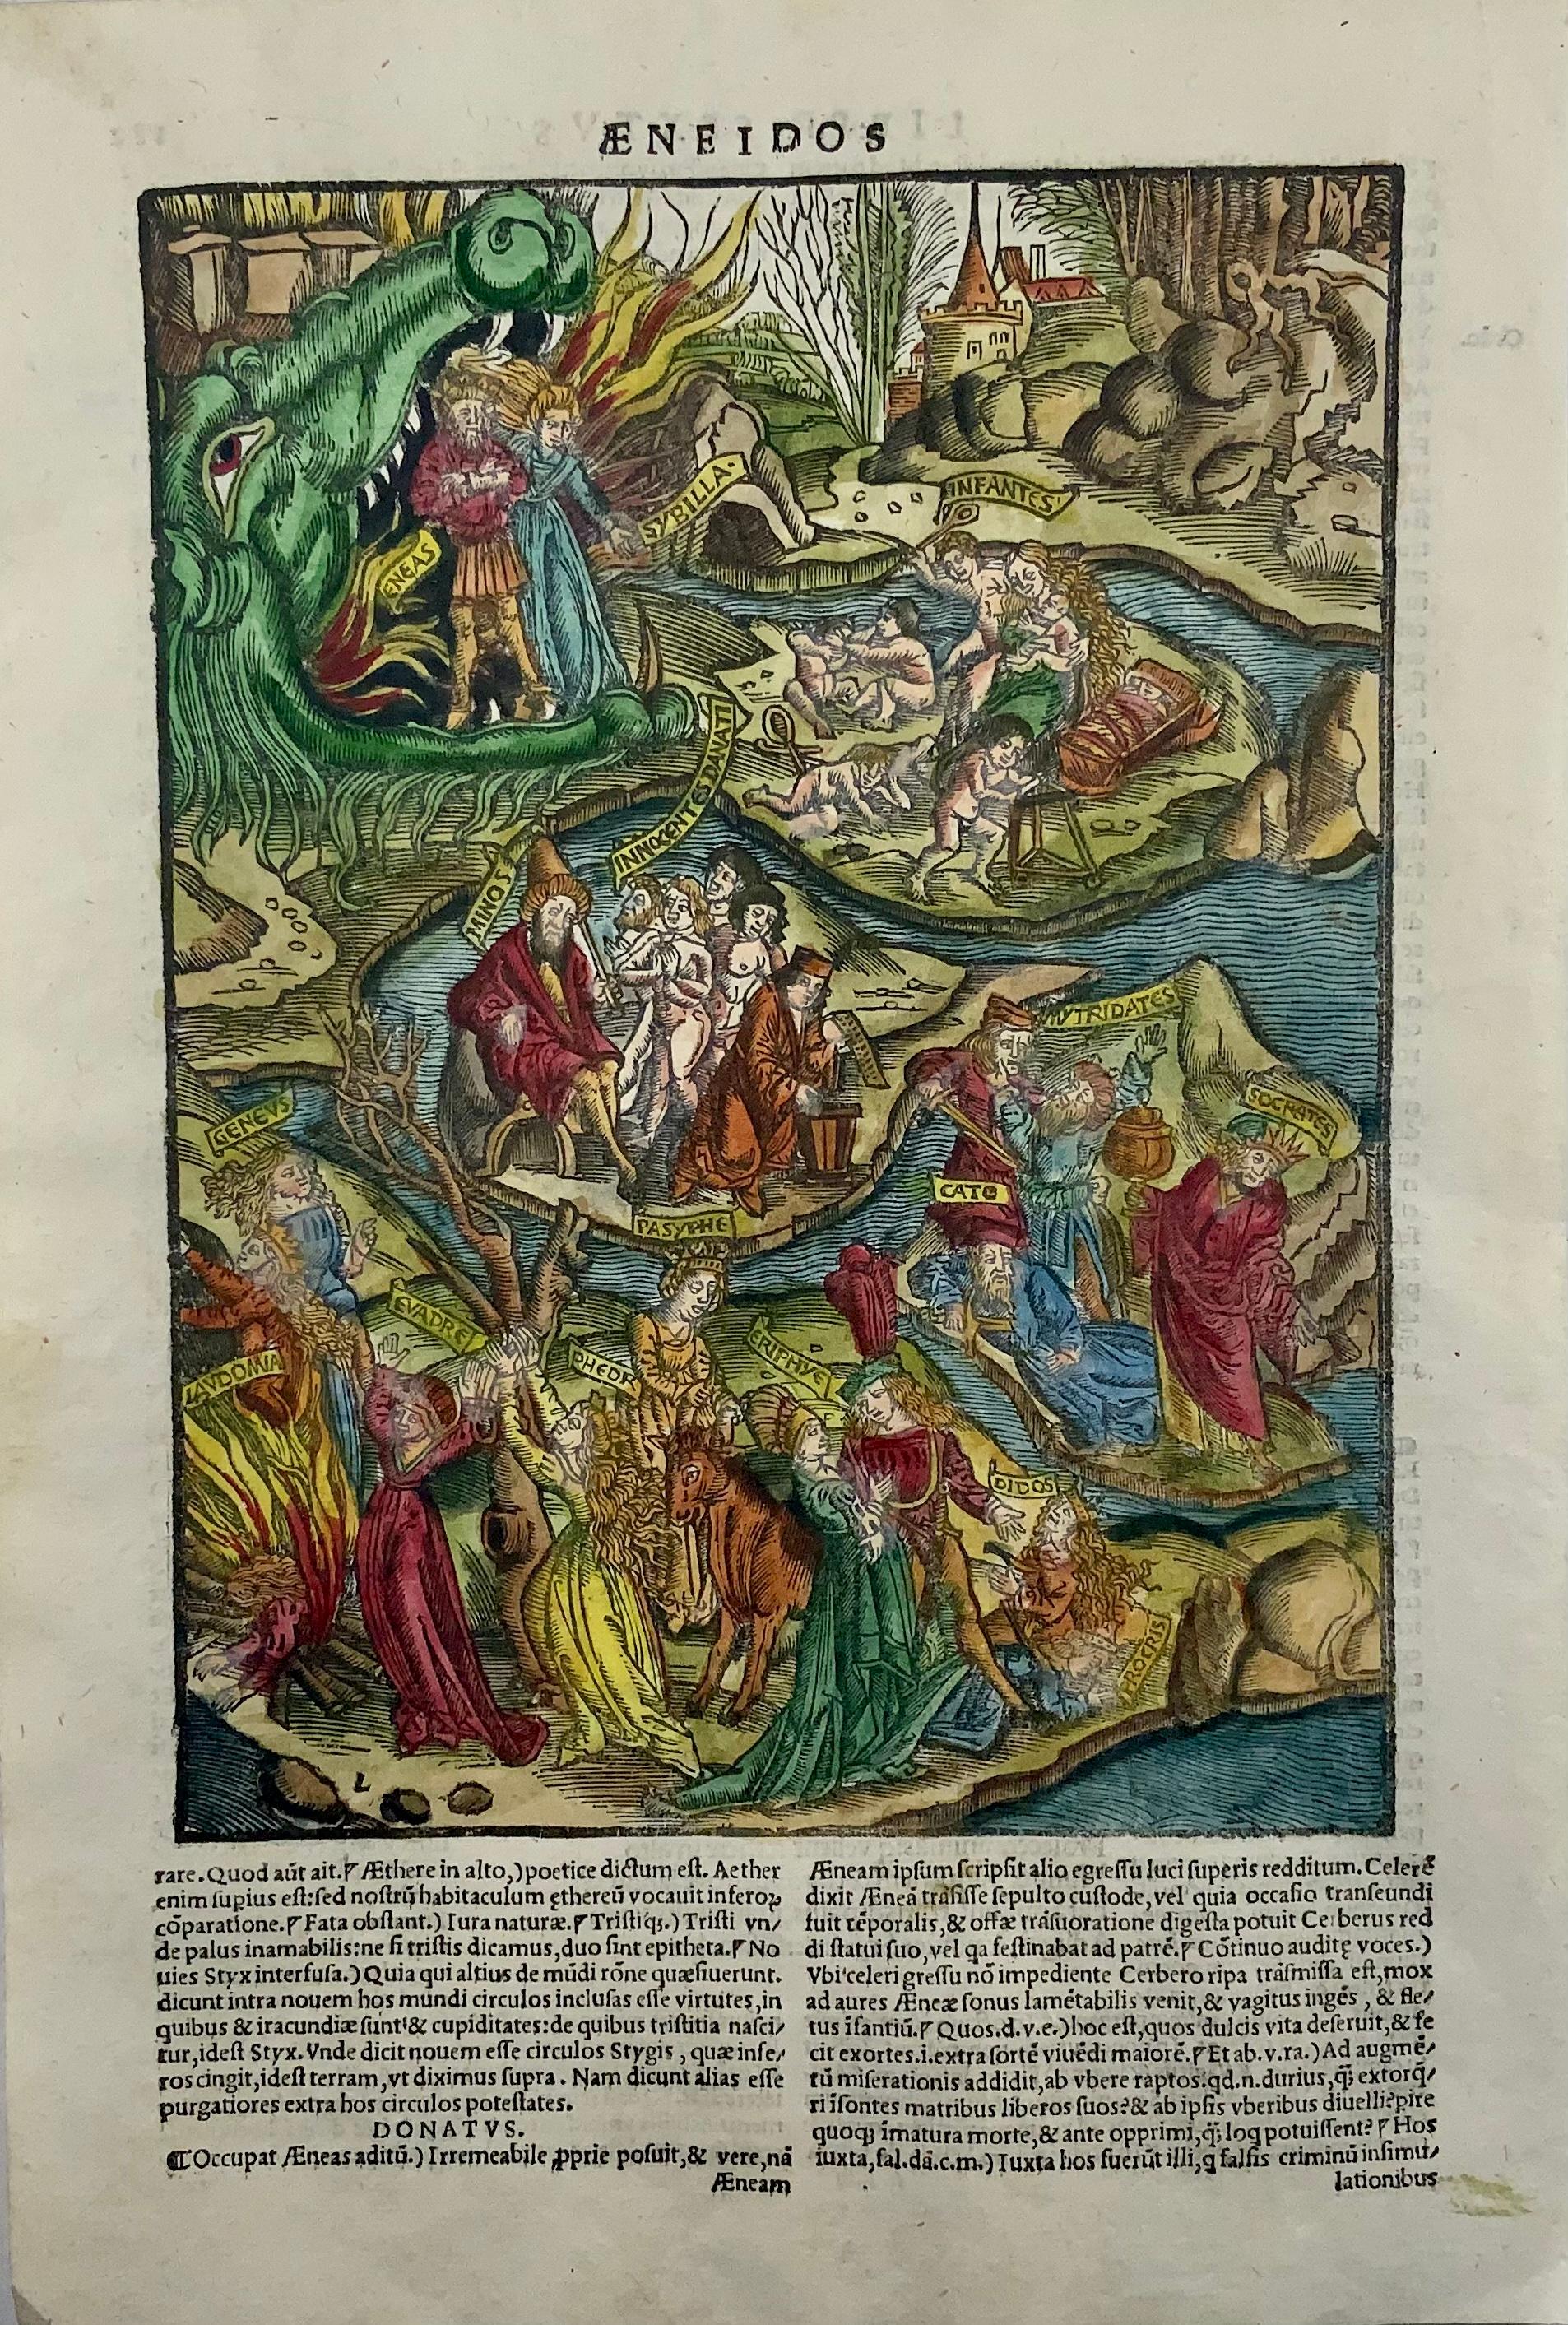 Dramatic, scarce and much sought after woodcut.

Virgil’s description of the underworld was so compelling that it undoubtedly served as an inspiration for Dante Alighieri’s conception of Hell in his famous work, The Divine Comedy. Despite Virgil’s